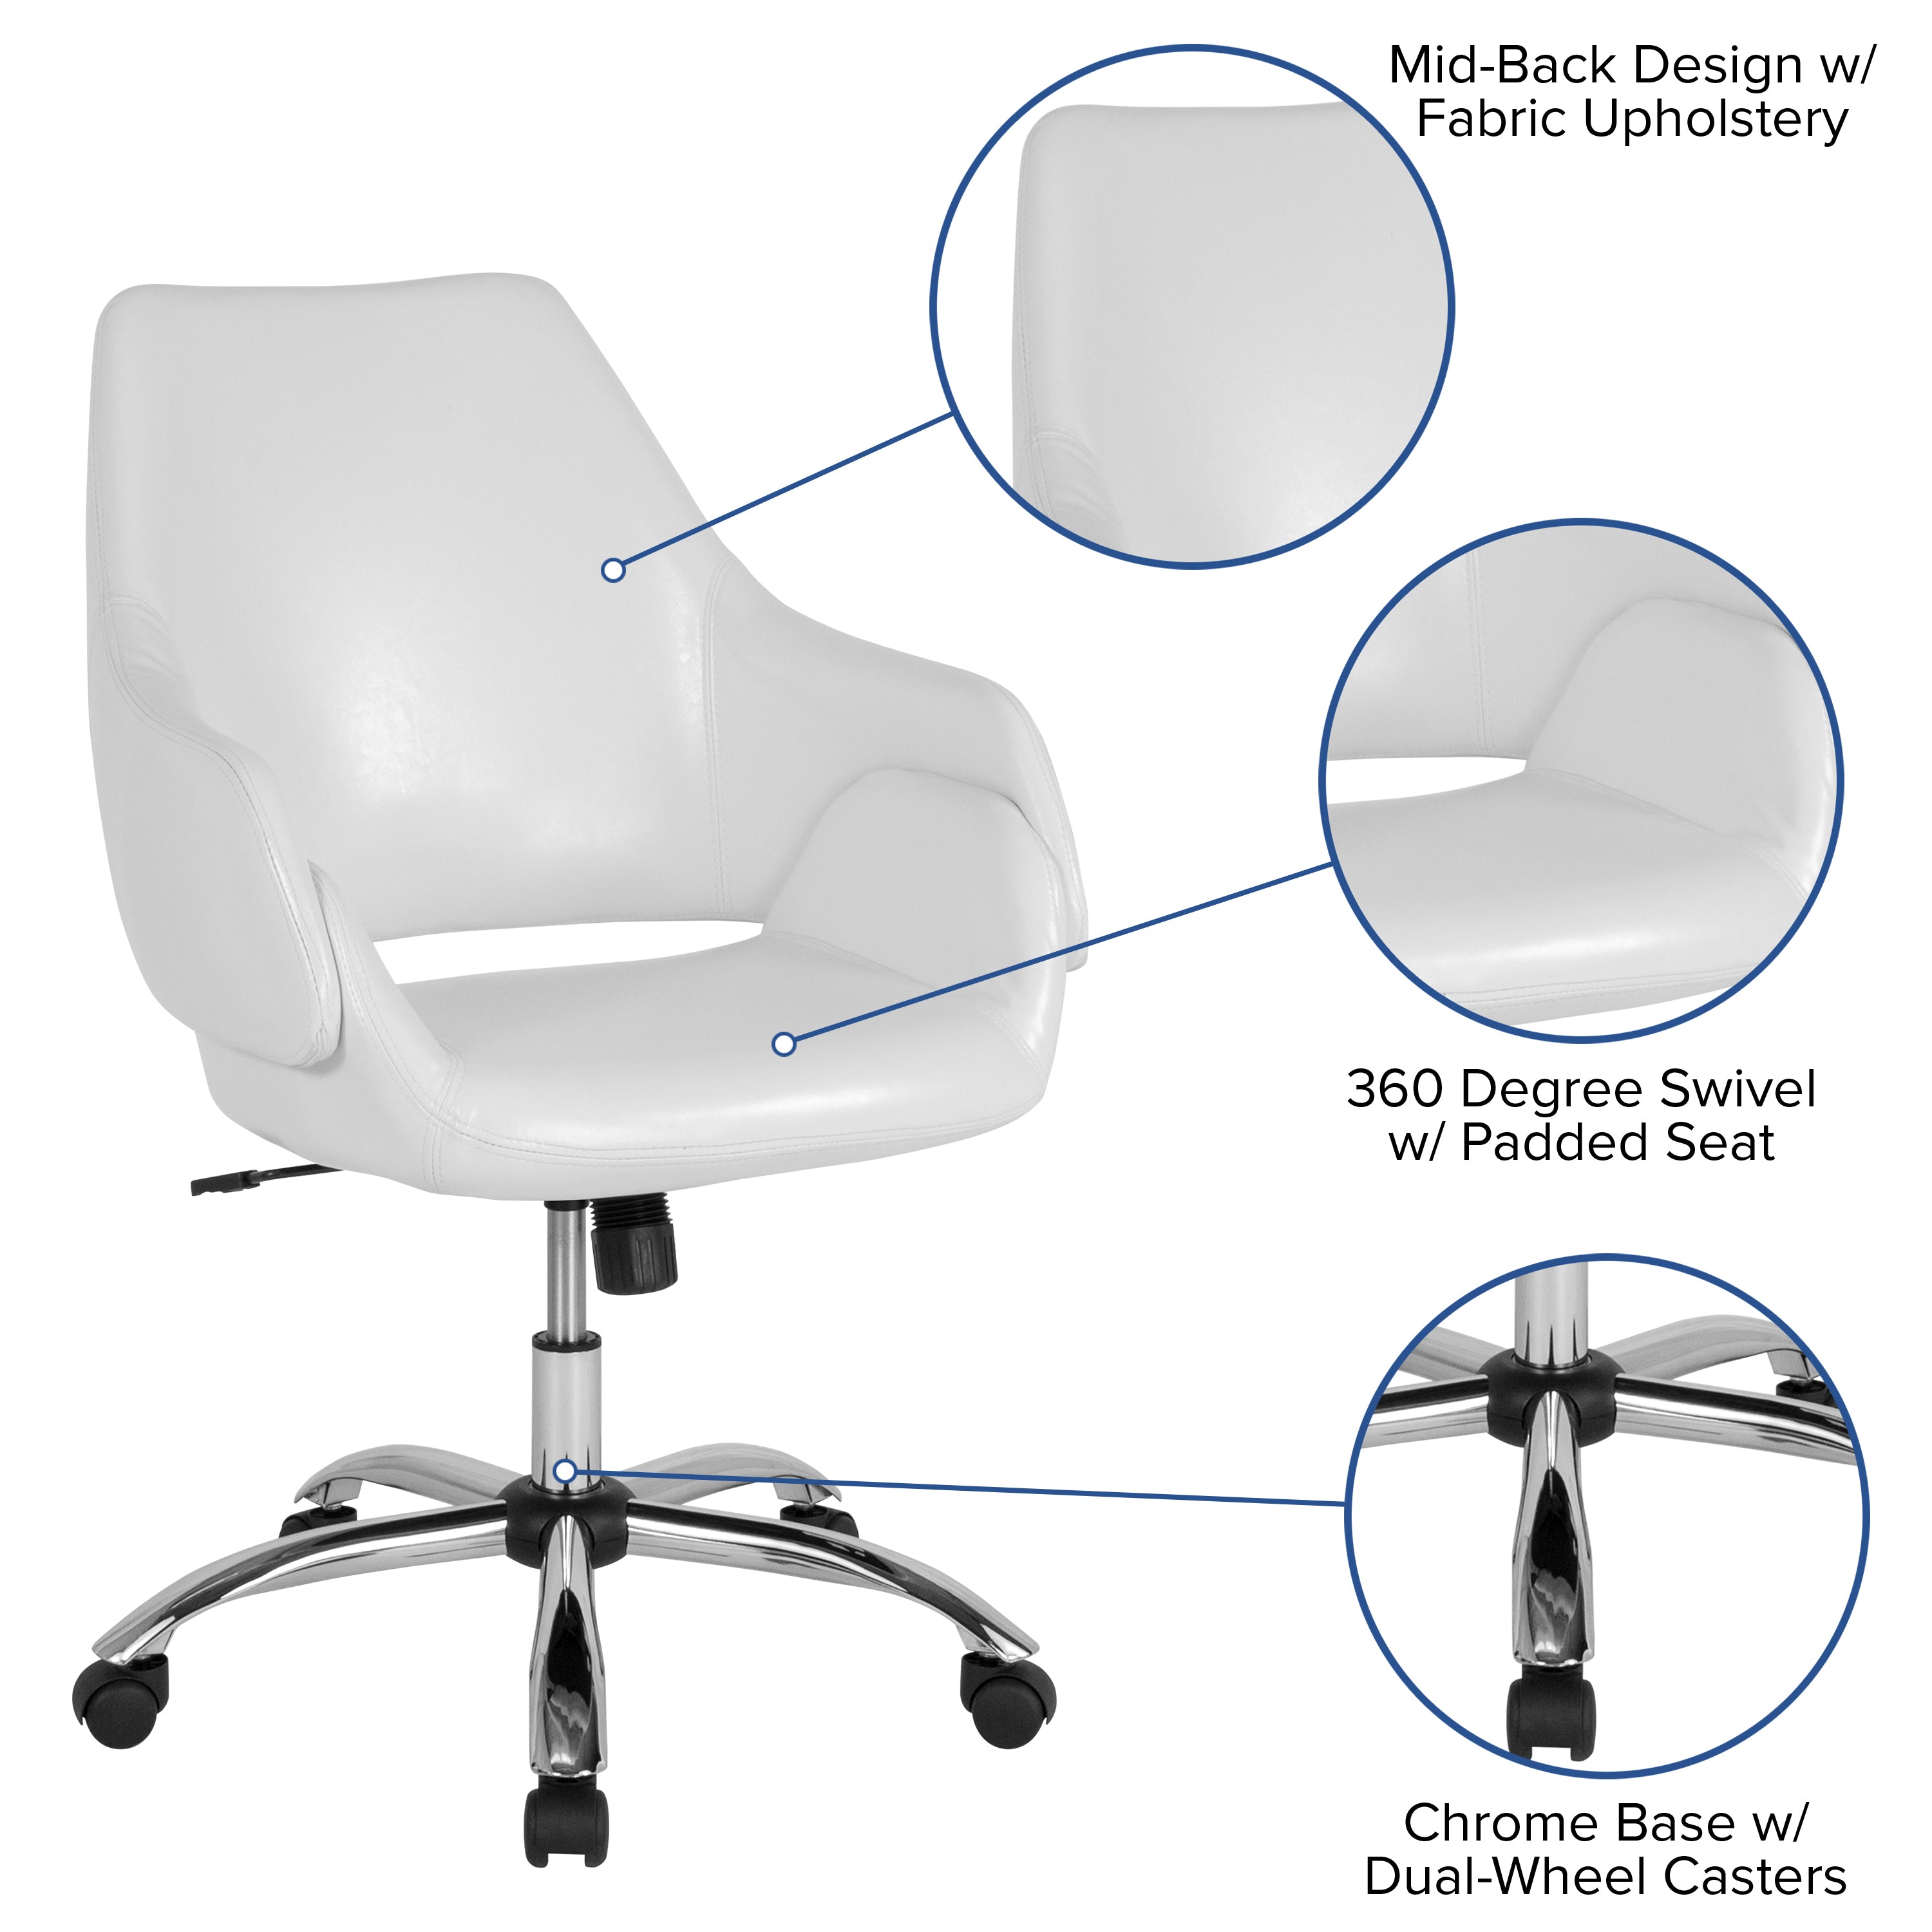 Madrid Home and Office Upholstered Mid-Back Office Chair with Wrap Style Arms-Executive Office Chair-Flash Furniture-Wall2Wall Furnishings